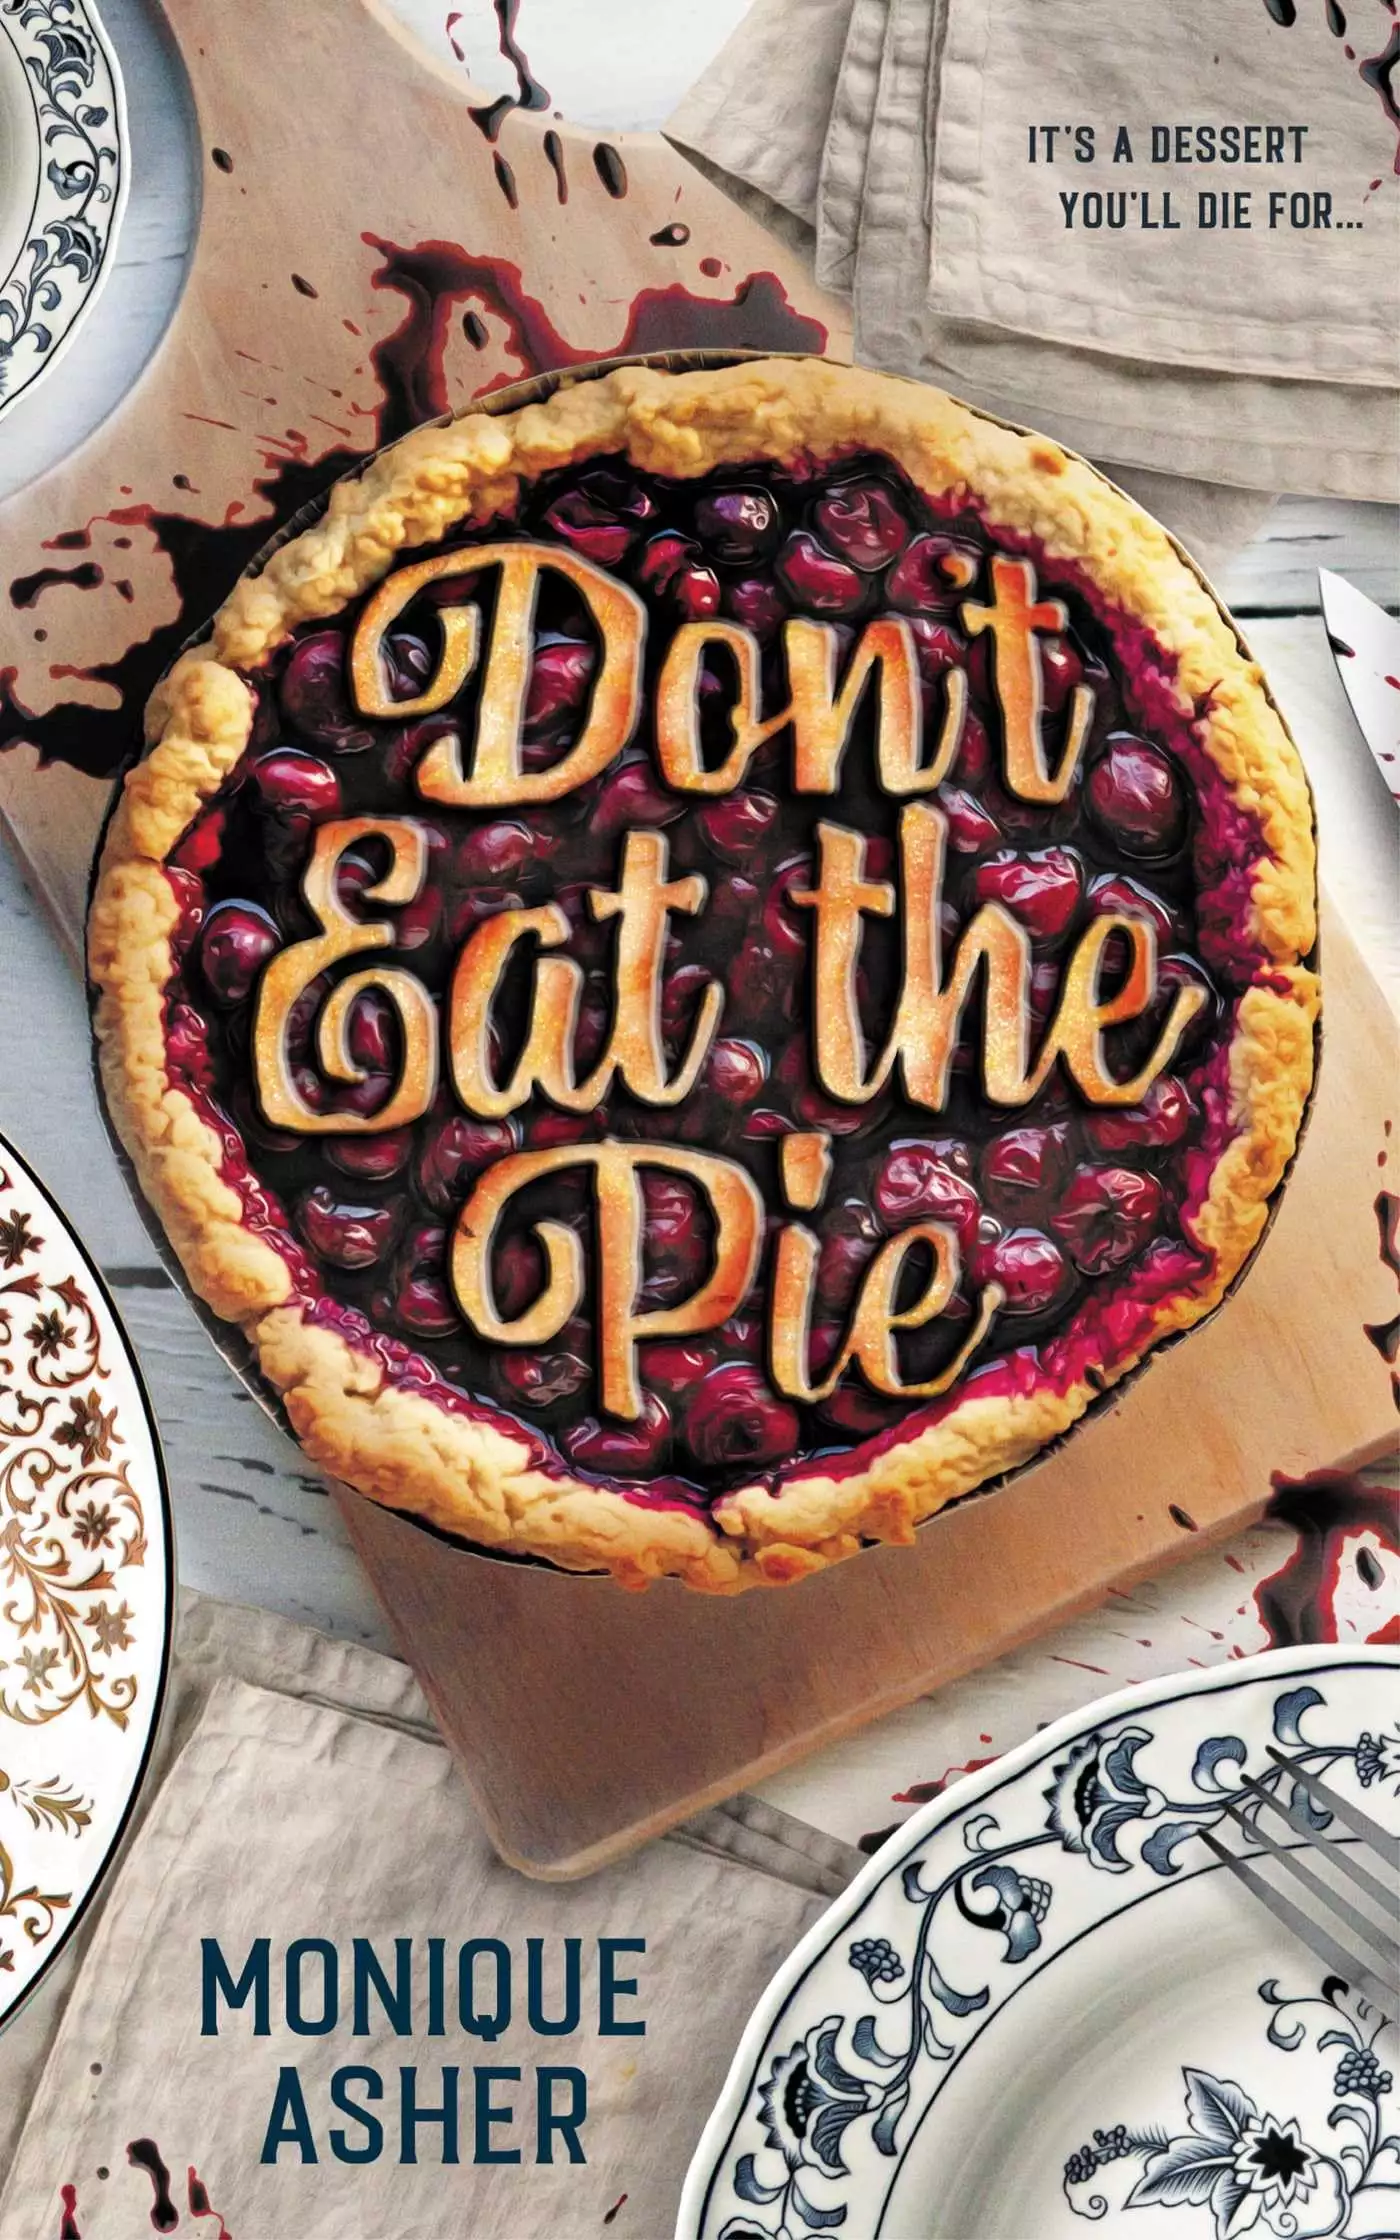 Don't Eat the Pie